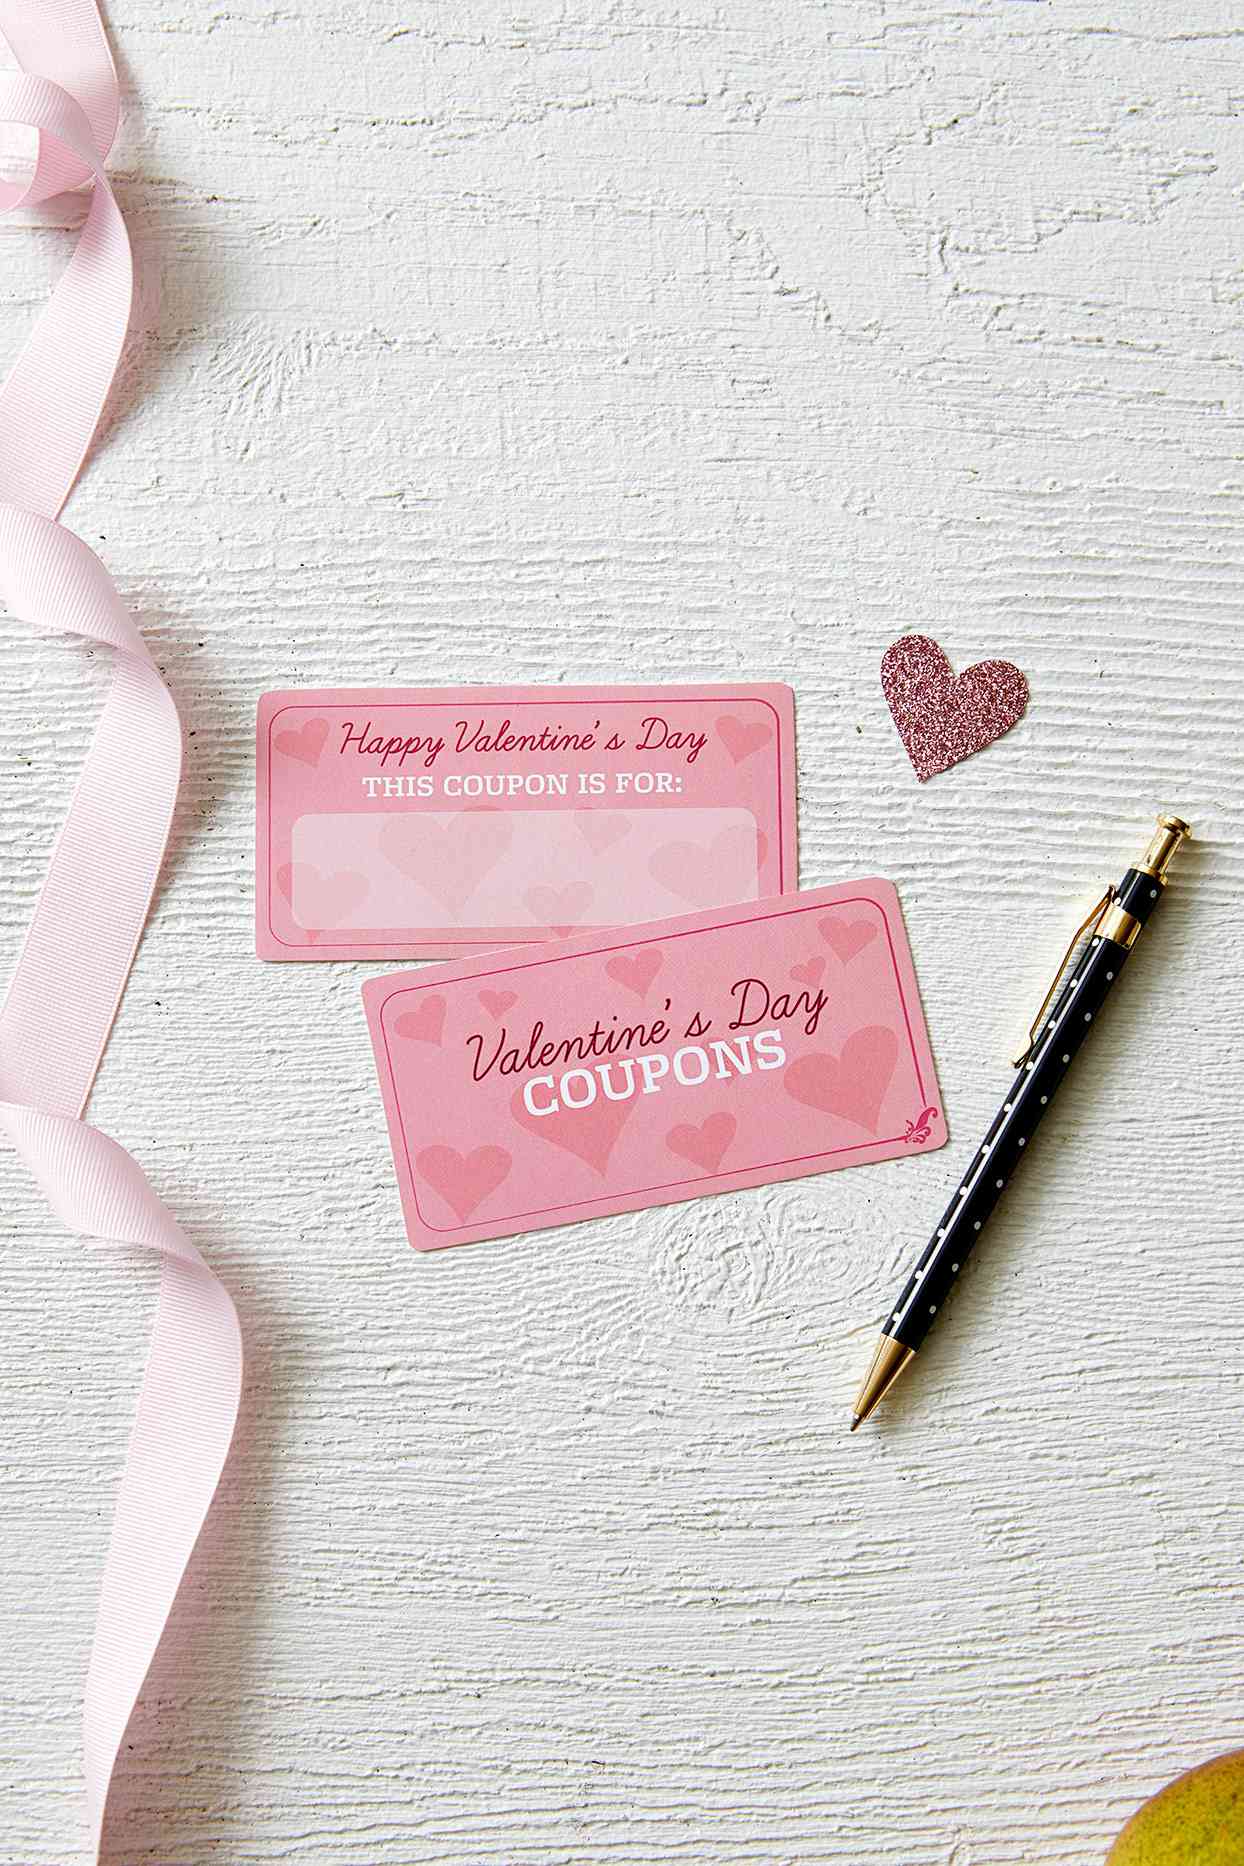 Valentine's Day coupons